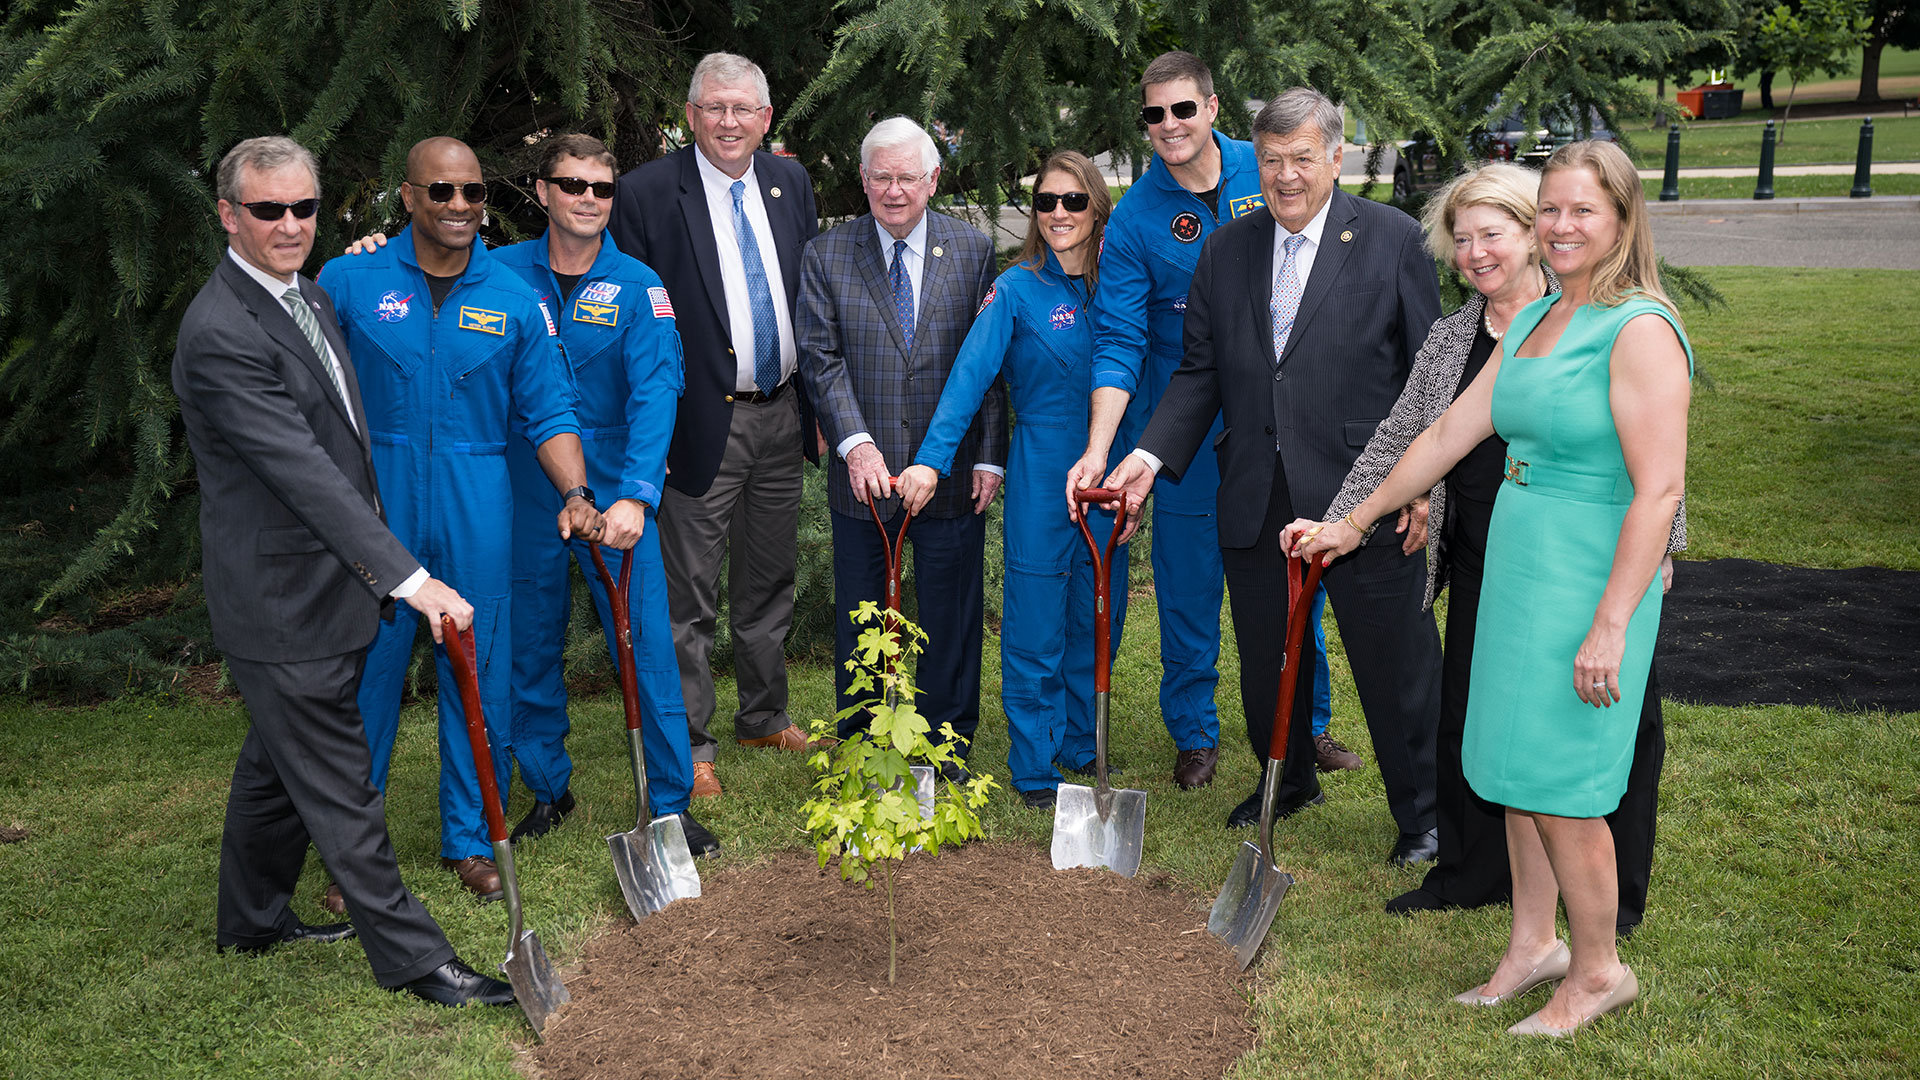 a group of people in suits and blue flight suits smile while planting a tiny tree